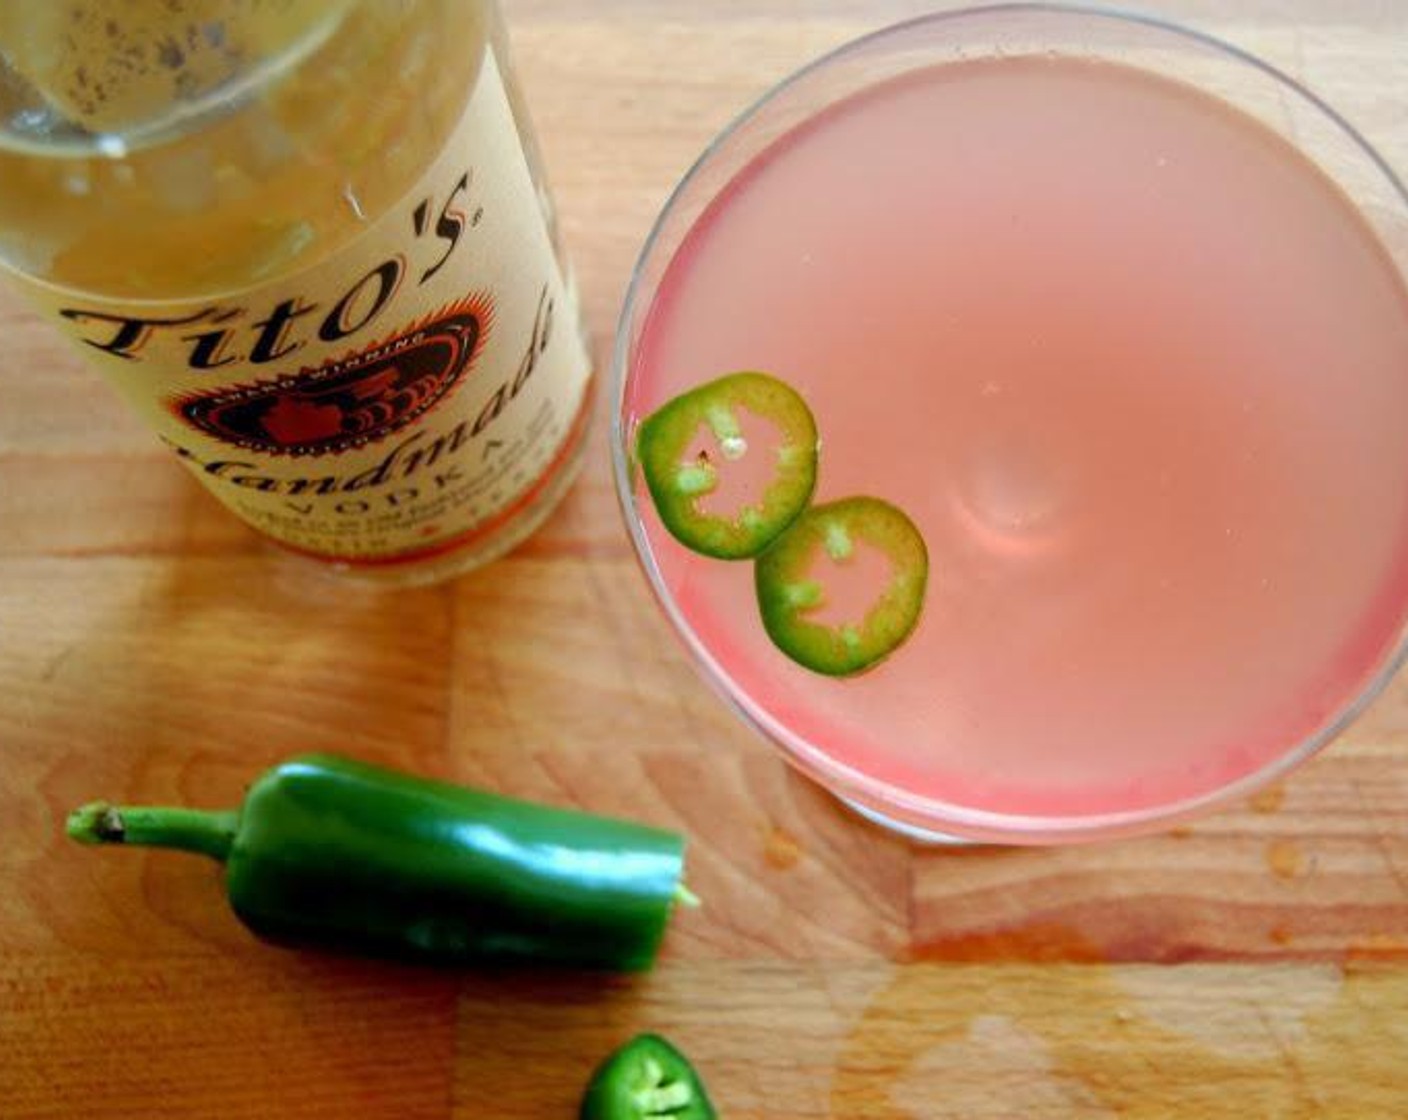 step 3 Strain into your favorite glass. Garnish with some Jalapeño Pepper Slices (to taste) if preferred. Serve and enjoy!